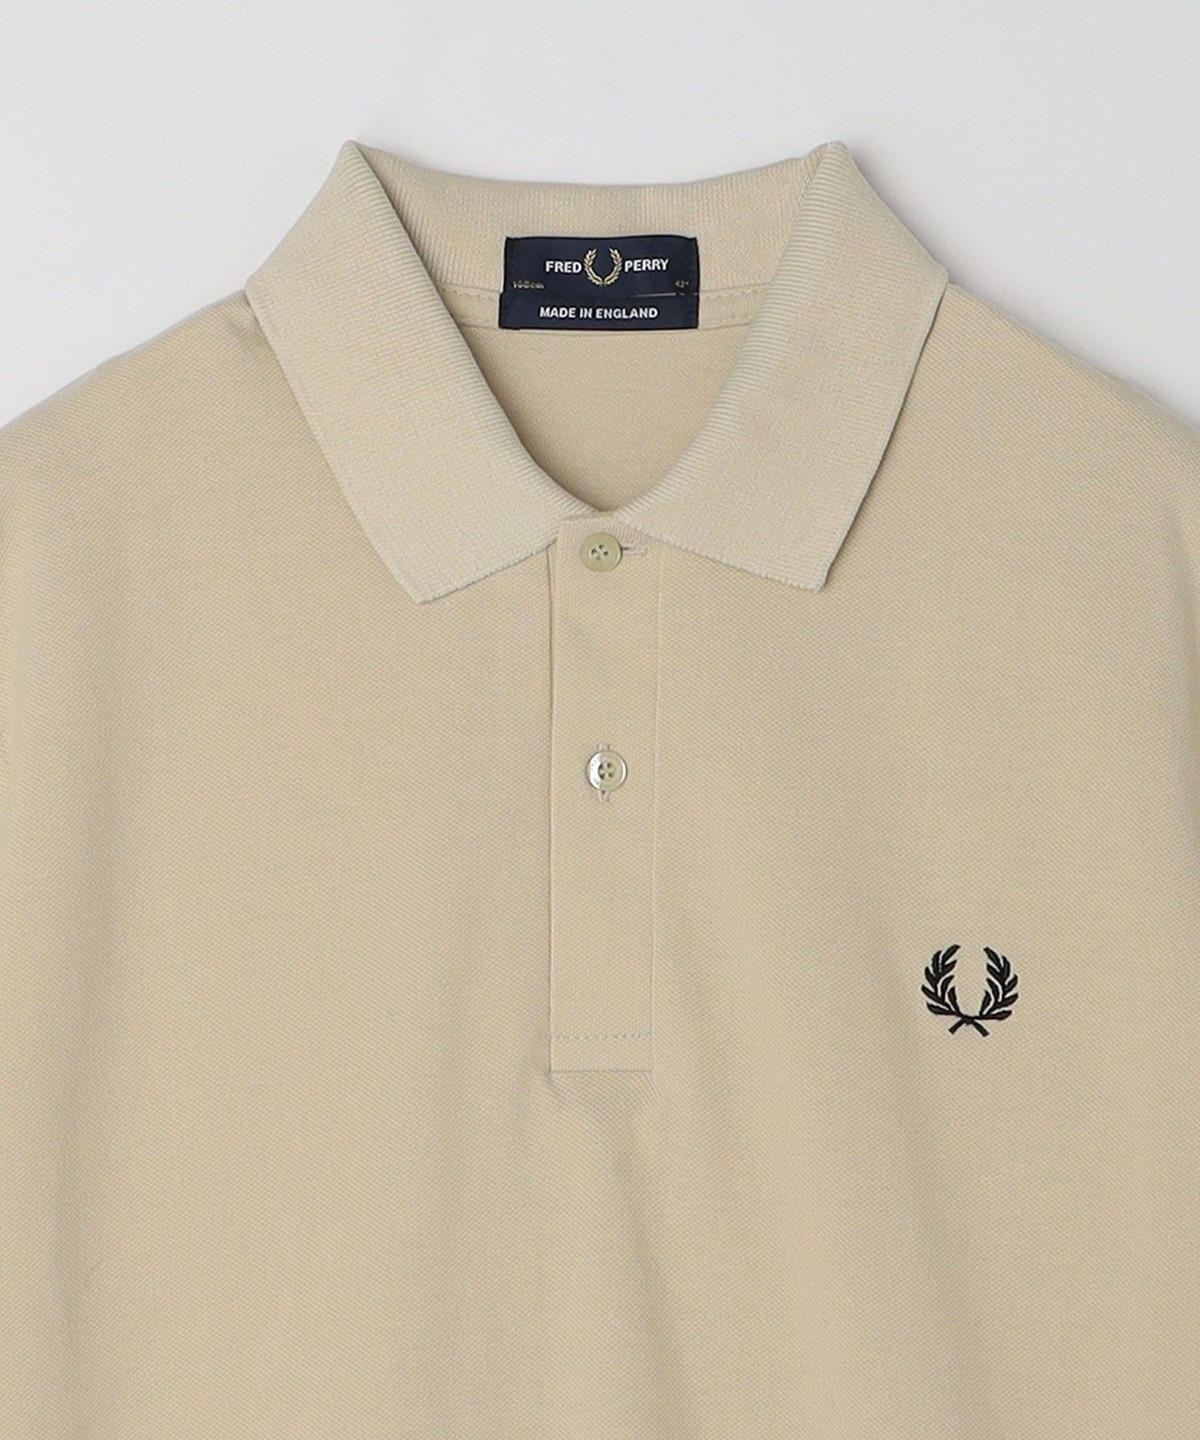 FRED PERRY:【M3】ENGLAND ポロシャツ: Tシャツ/カットソー SHIPS 公式